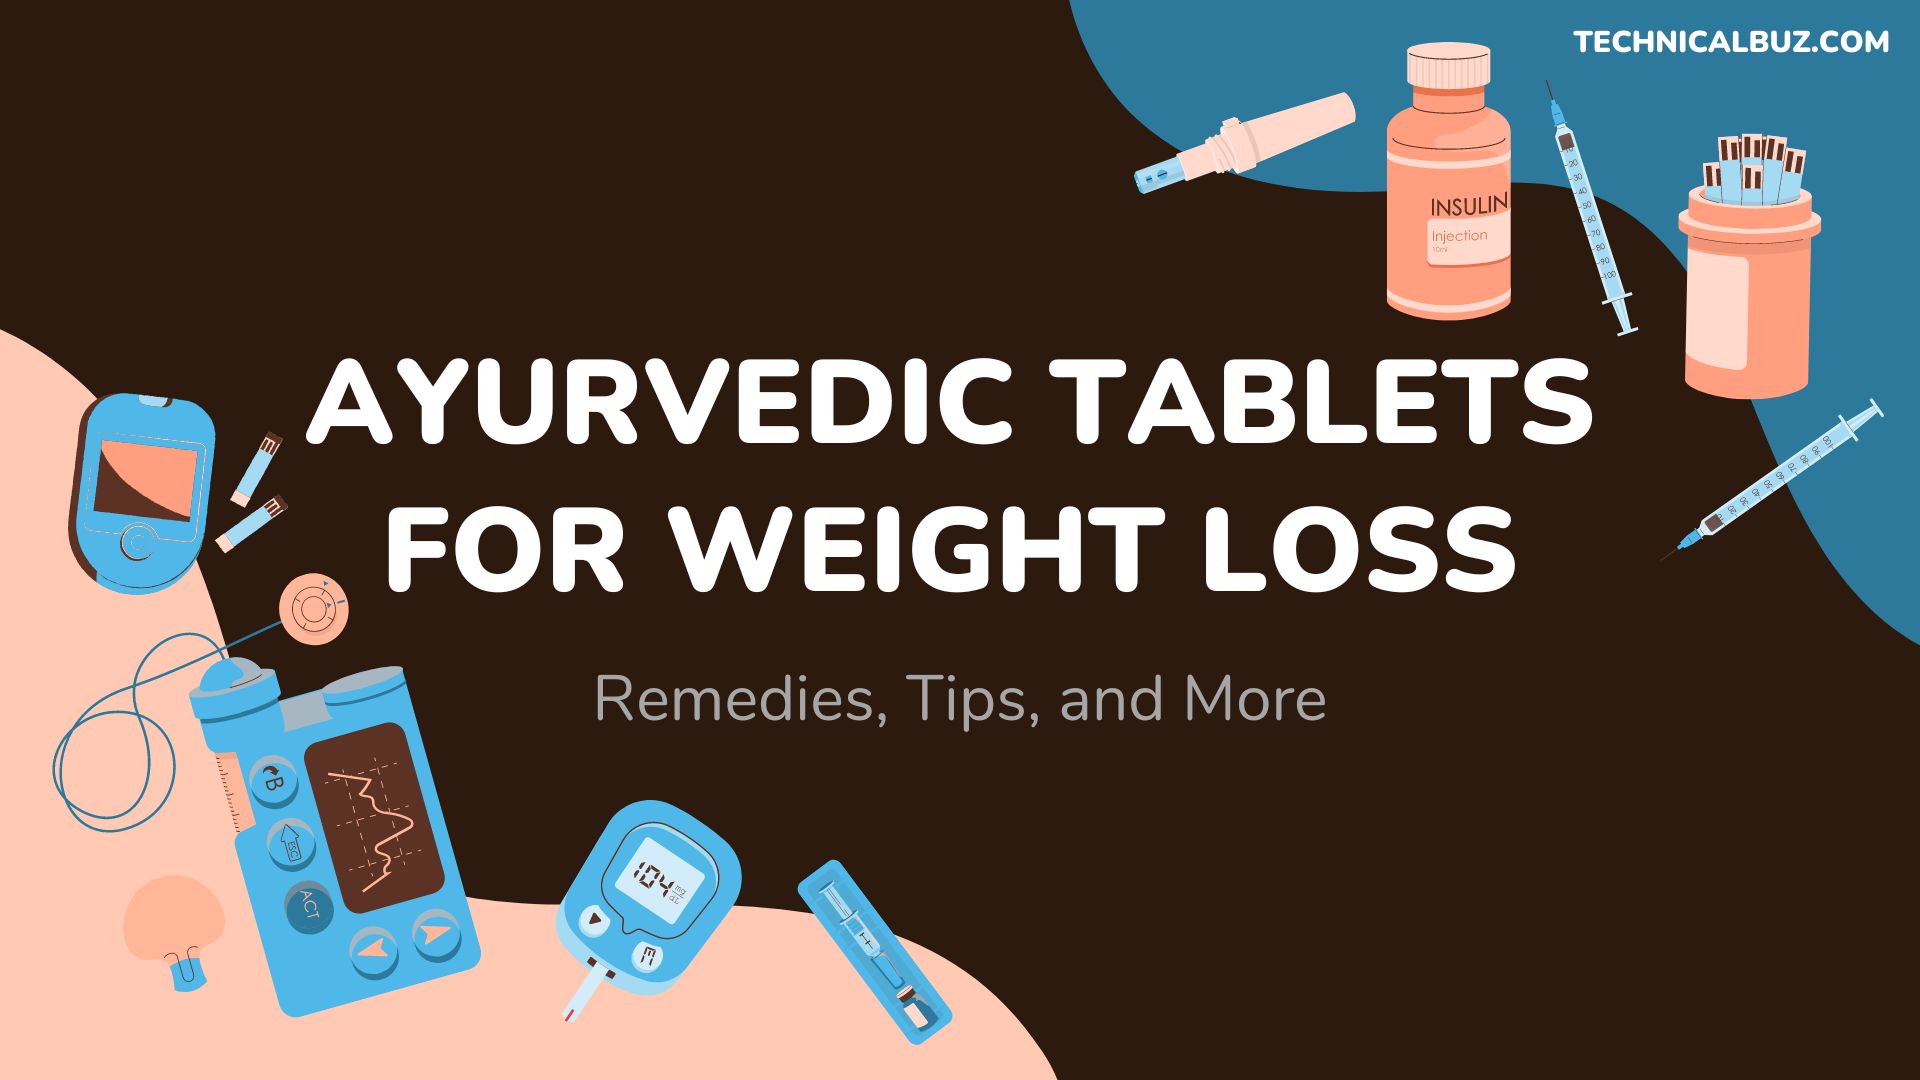 Ayurvedic Tablets for Weight Loss: Remedies, Tips, and More